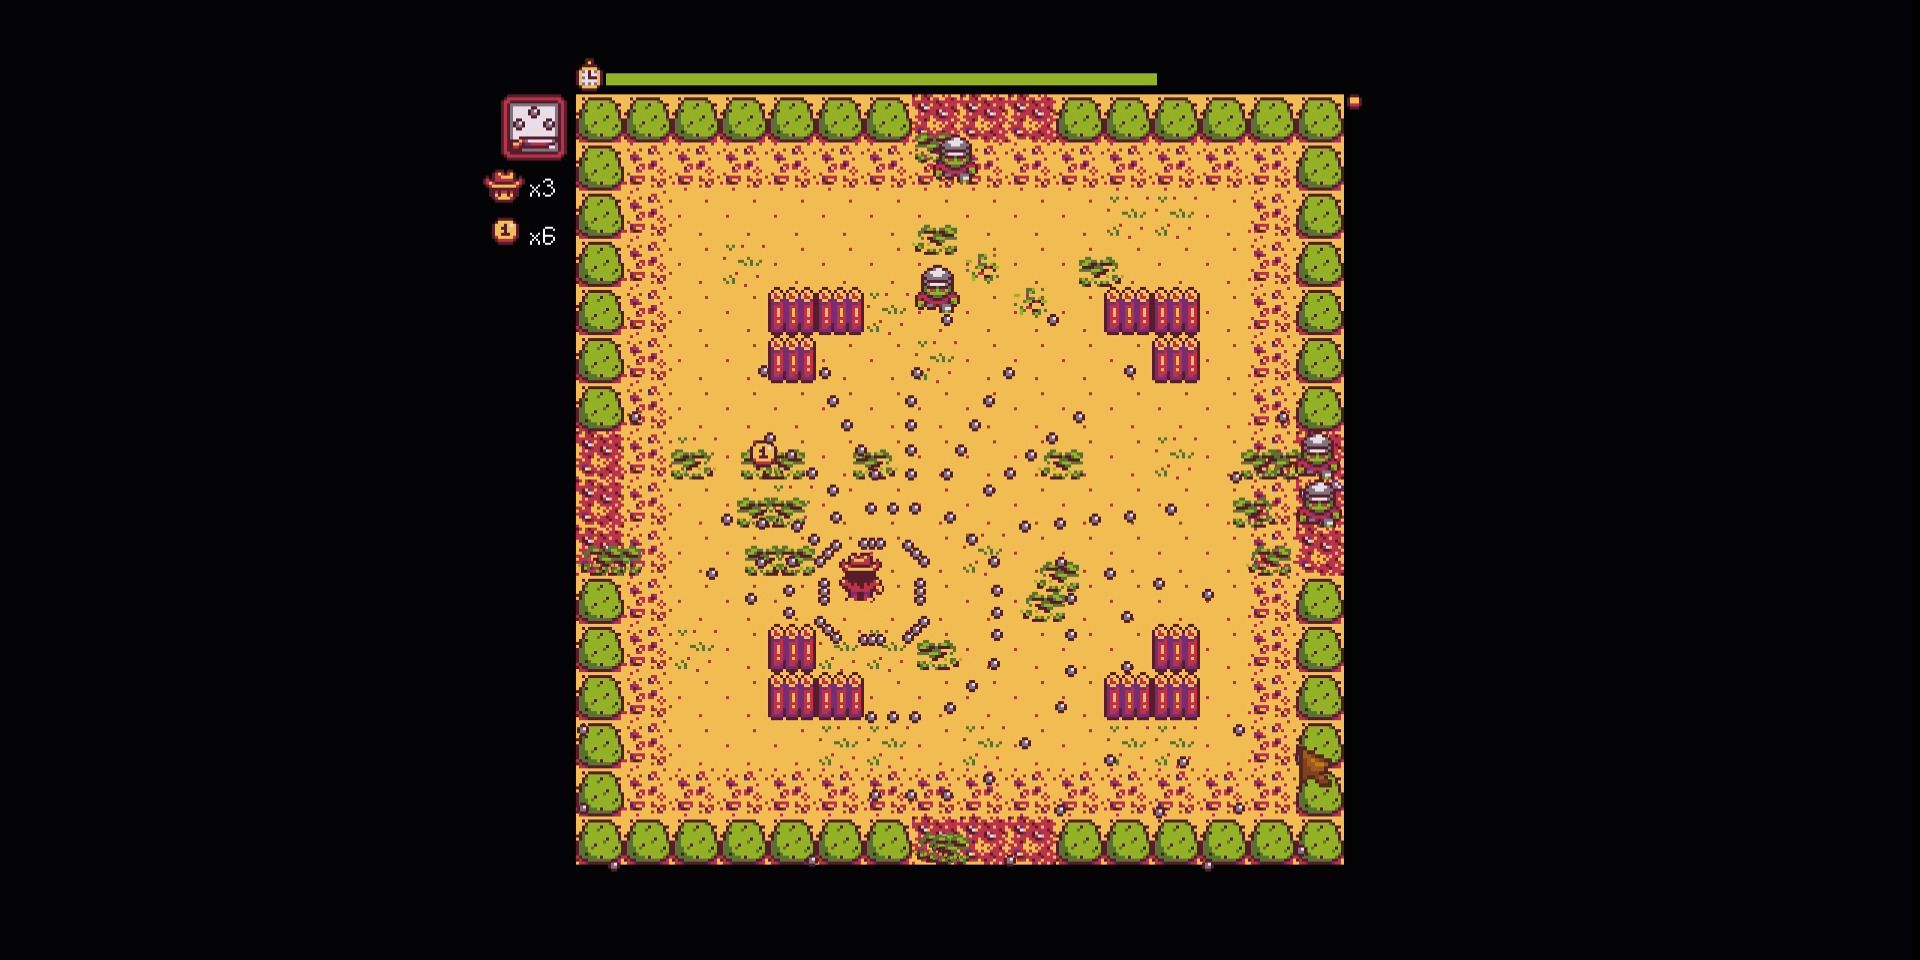 Image of the character using upgrades picked up from enemies in Journey of the Prairie King in Stardew Valley